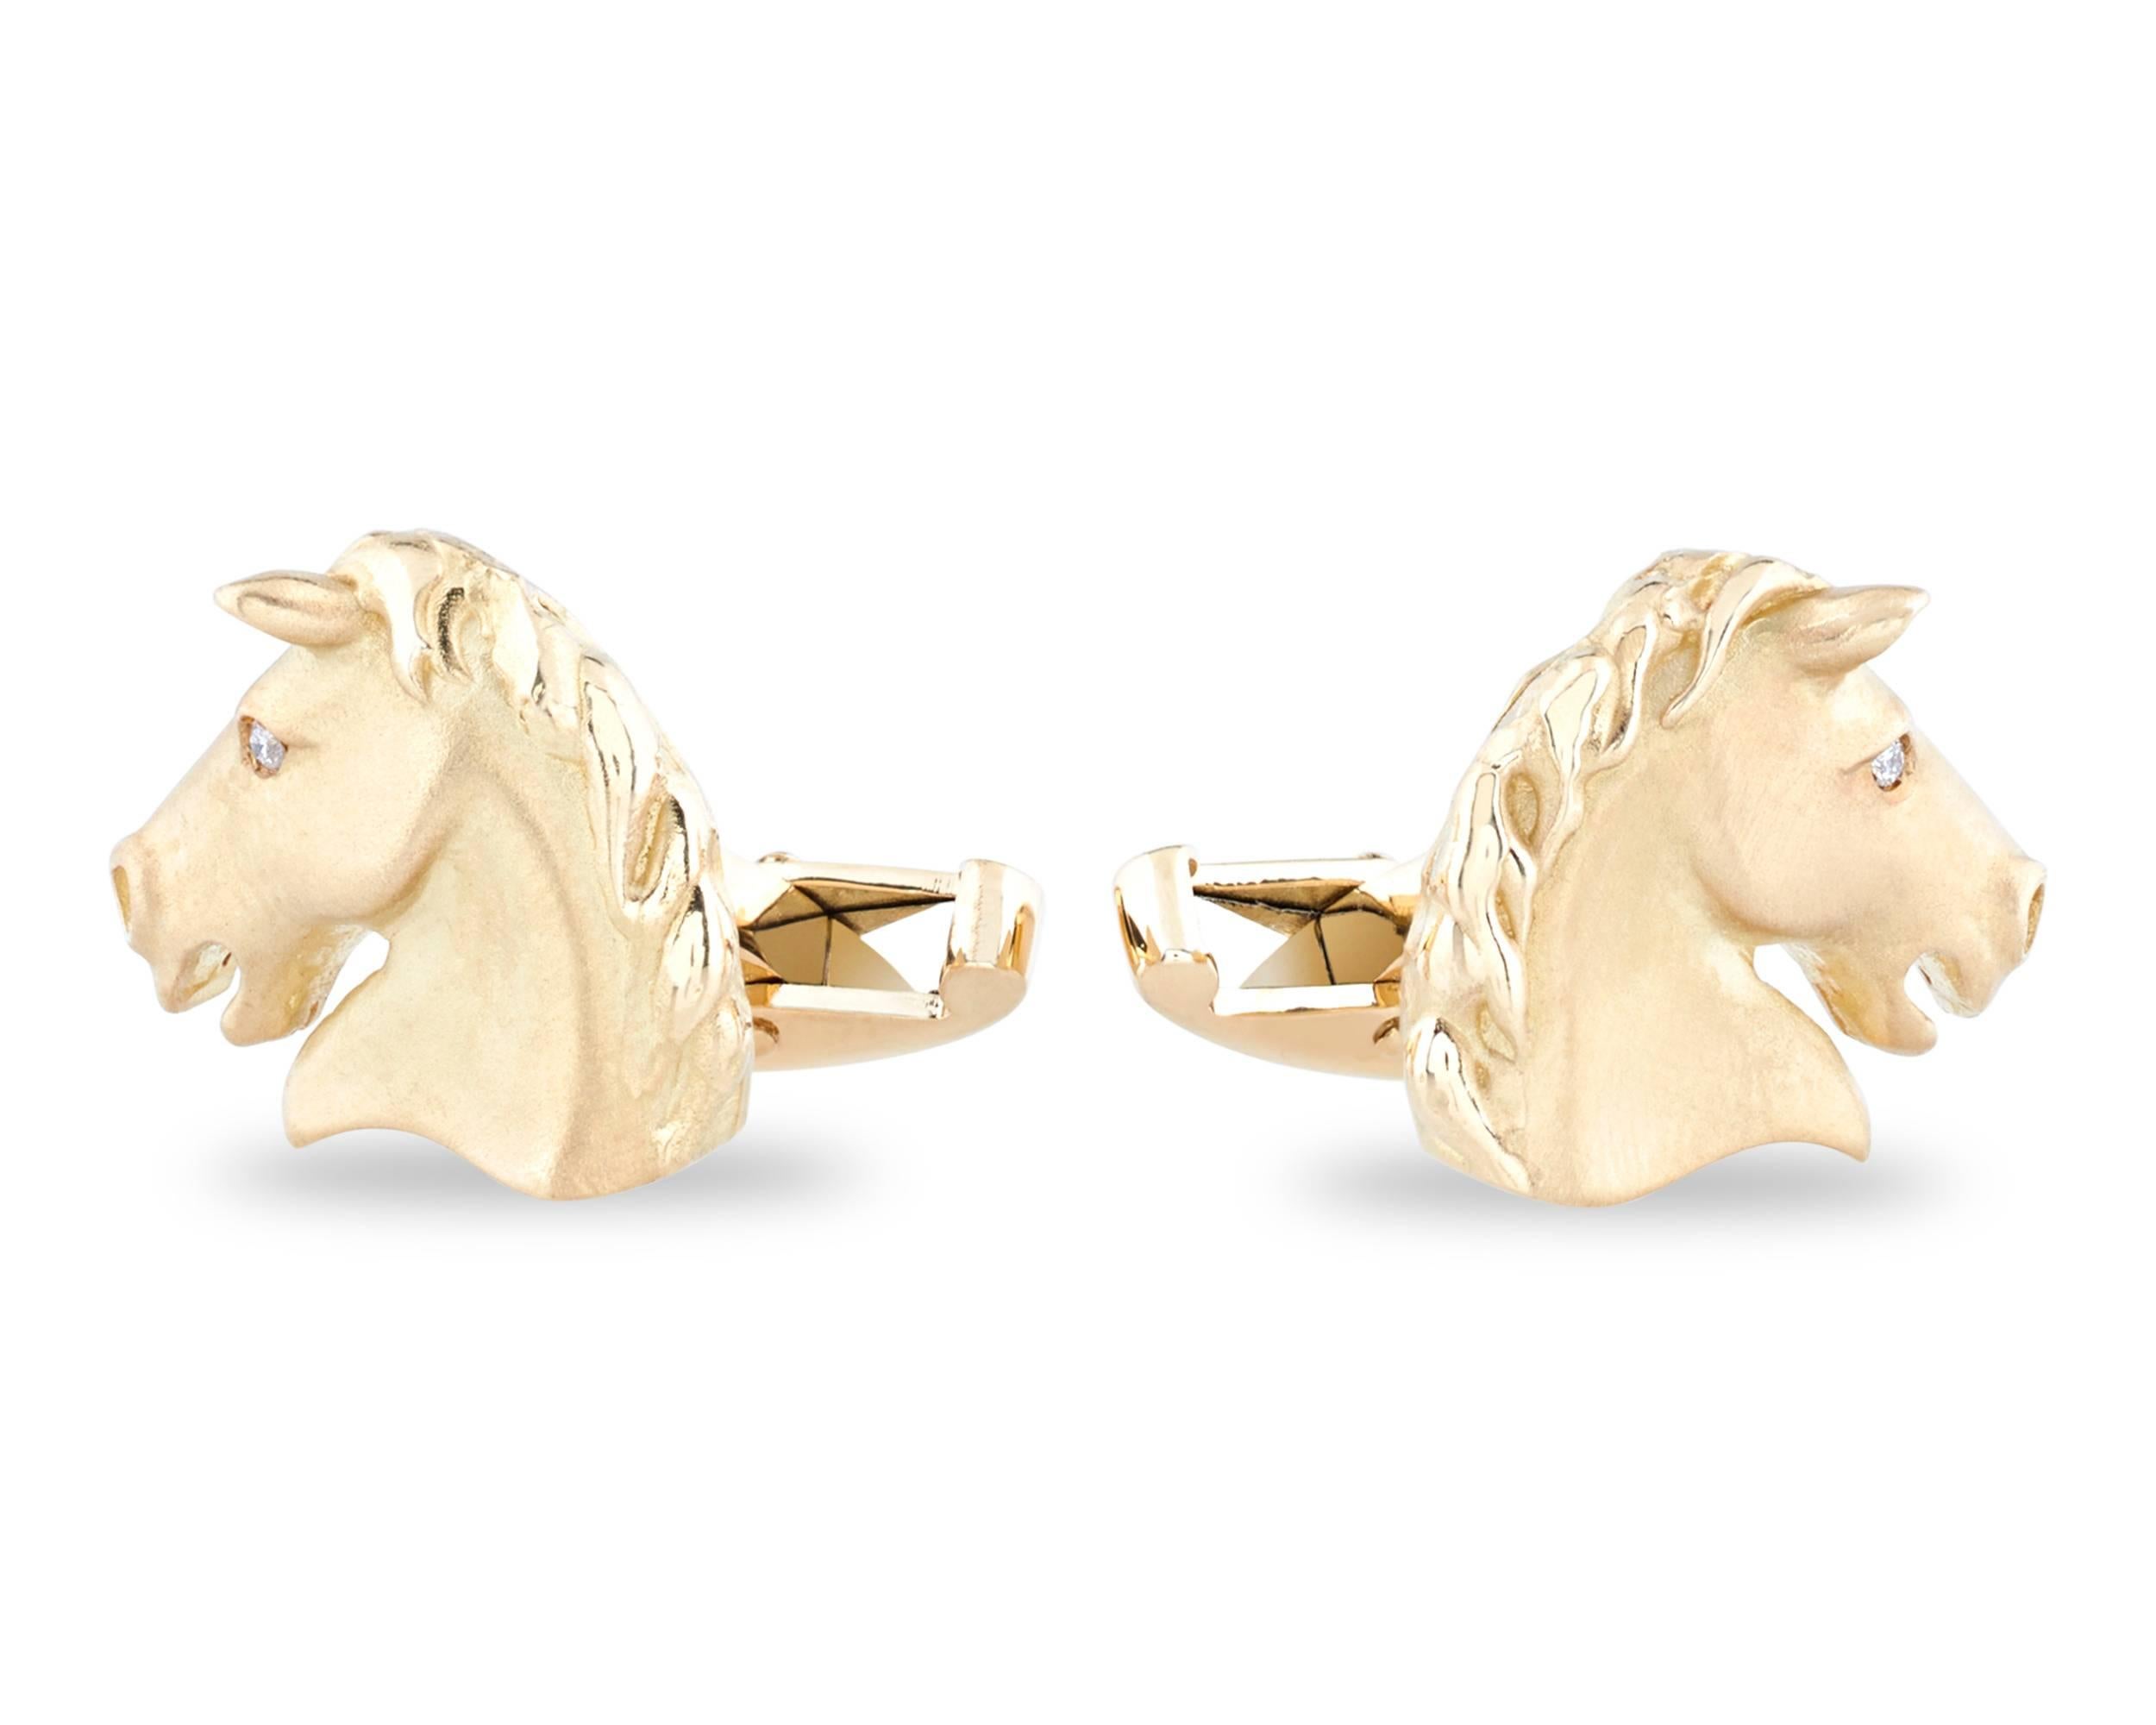 This handsome pair of 18K yellow gold horse cufflinks is simply adorned with two white diamonds accents at the eye.

Hallmarked 750 with anchor assay mark of Birmingham, England

5/8